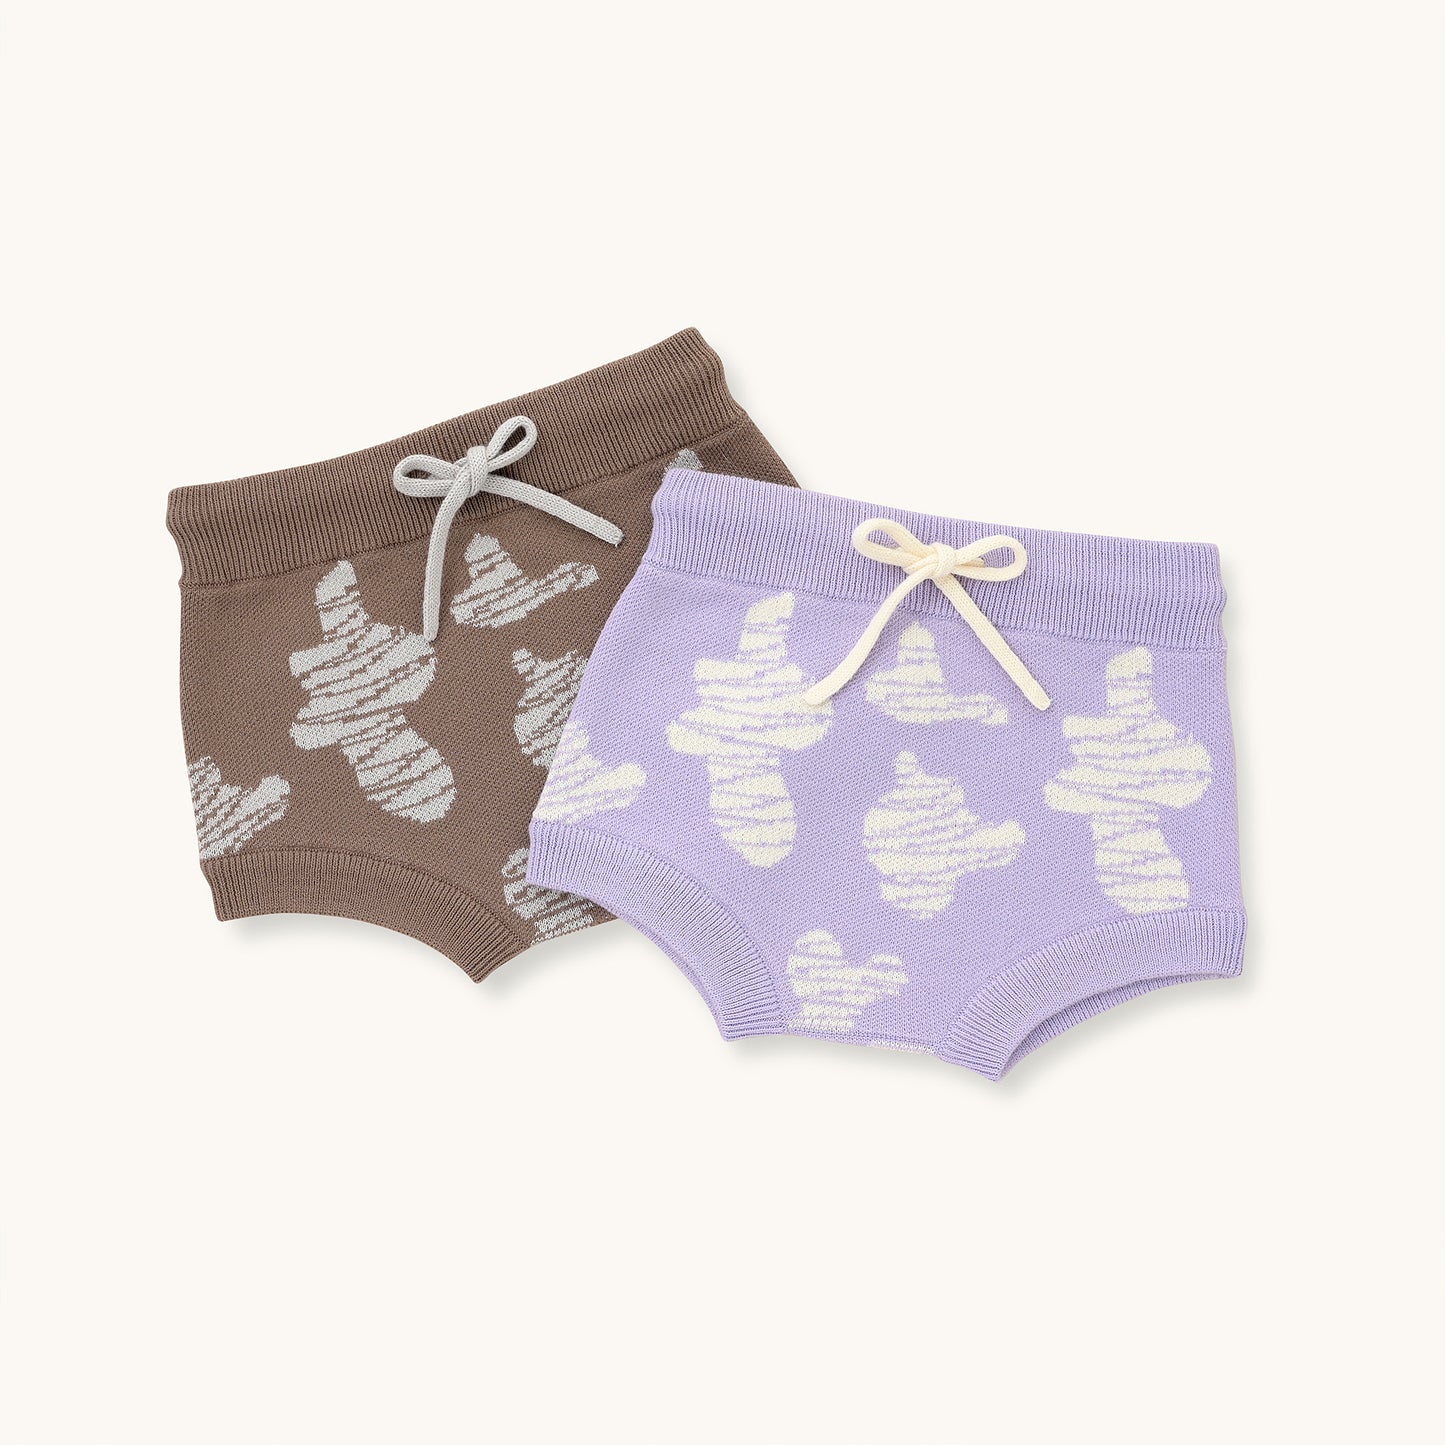 KNITTED SPOTS BLOOMERS - CHOCO; 100% Organic Cotton; Classy Jacquard Bloomers made from GOTS-certified organic cotton; 'CHOCO SPOTS' Jacquard pattern; Elasticated waistband. 